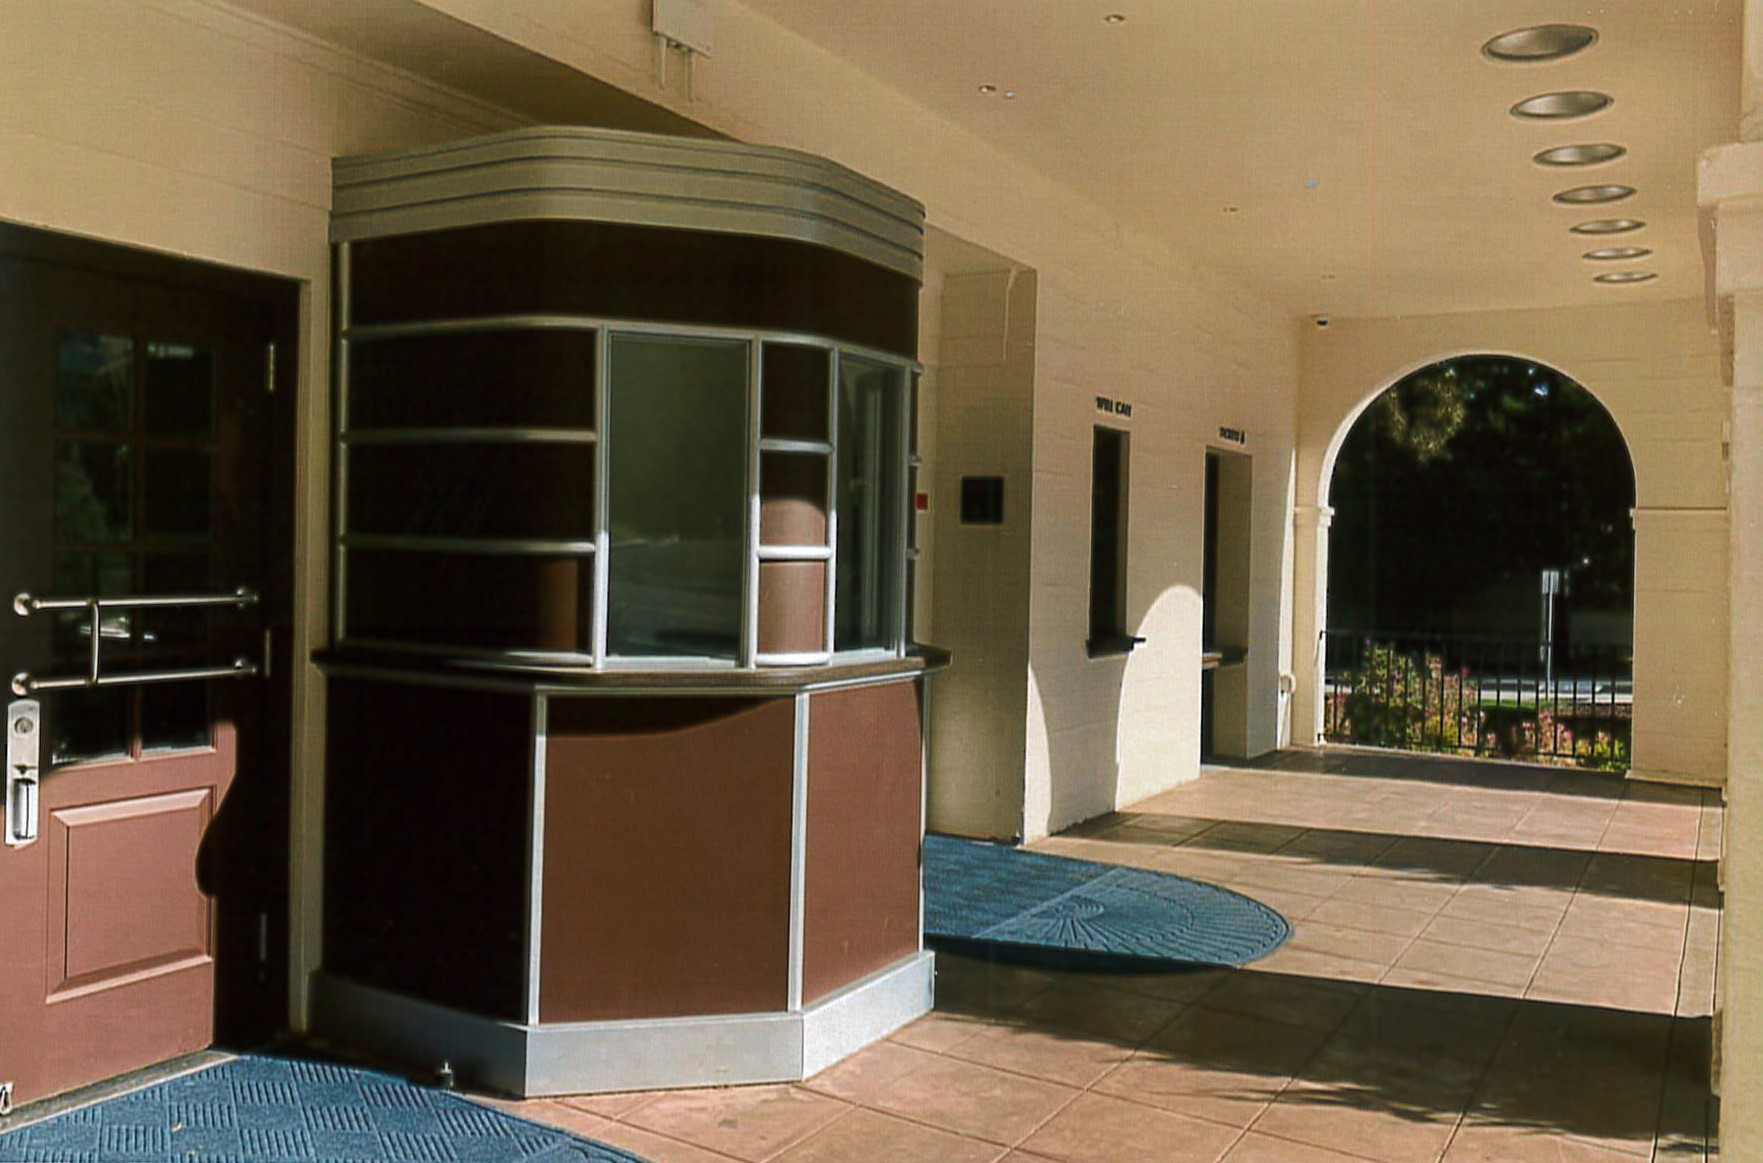 After Presidio ticket booth 